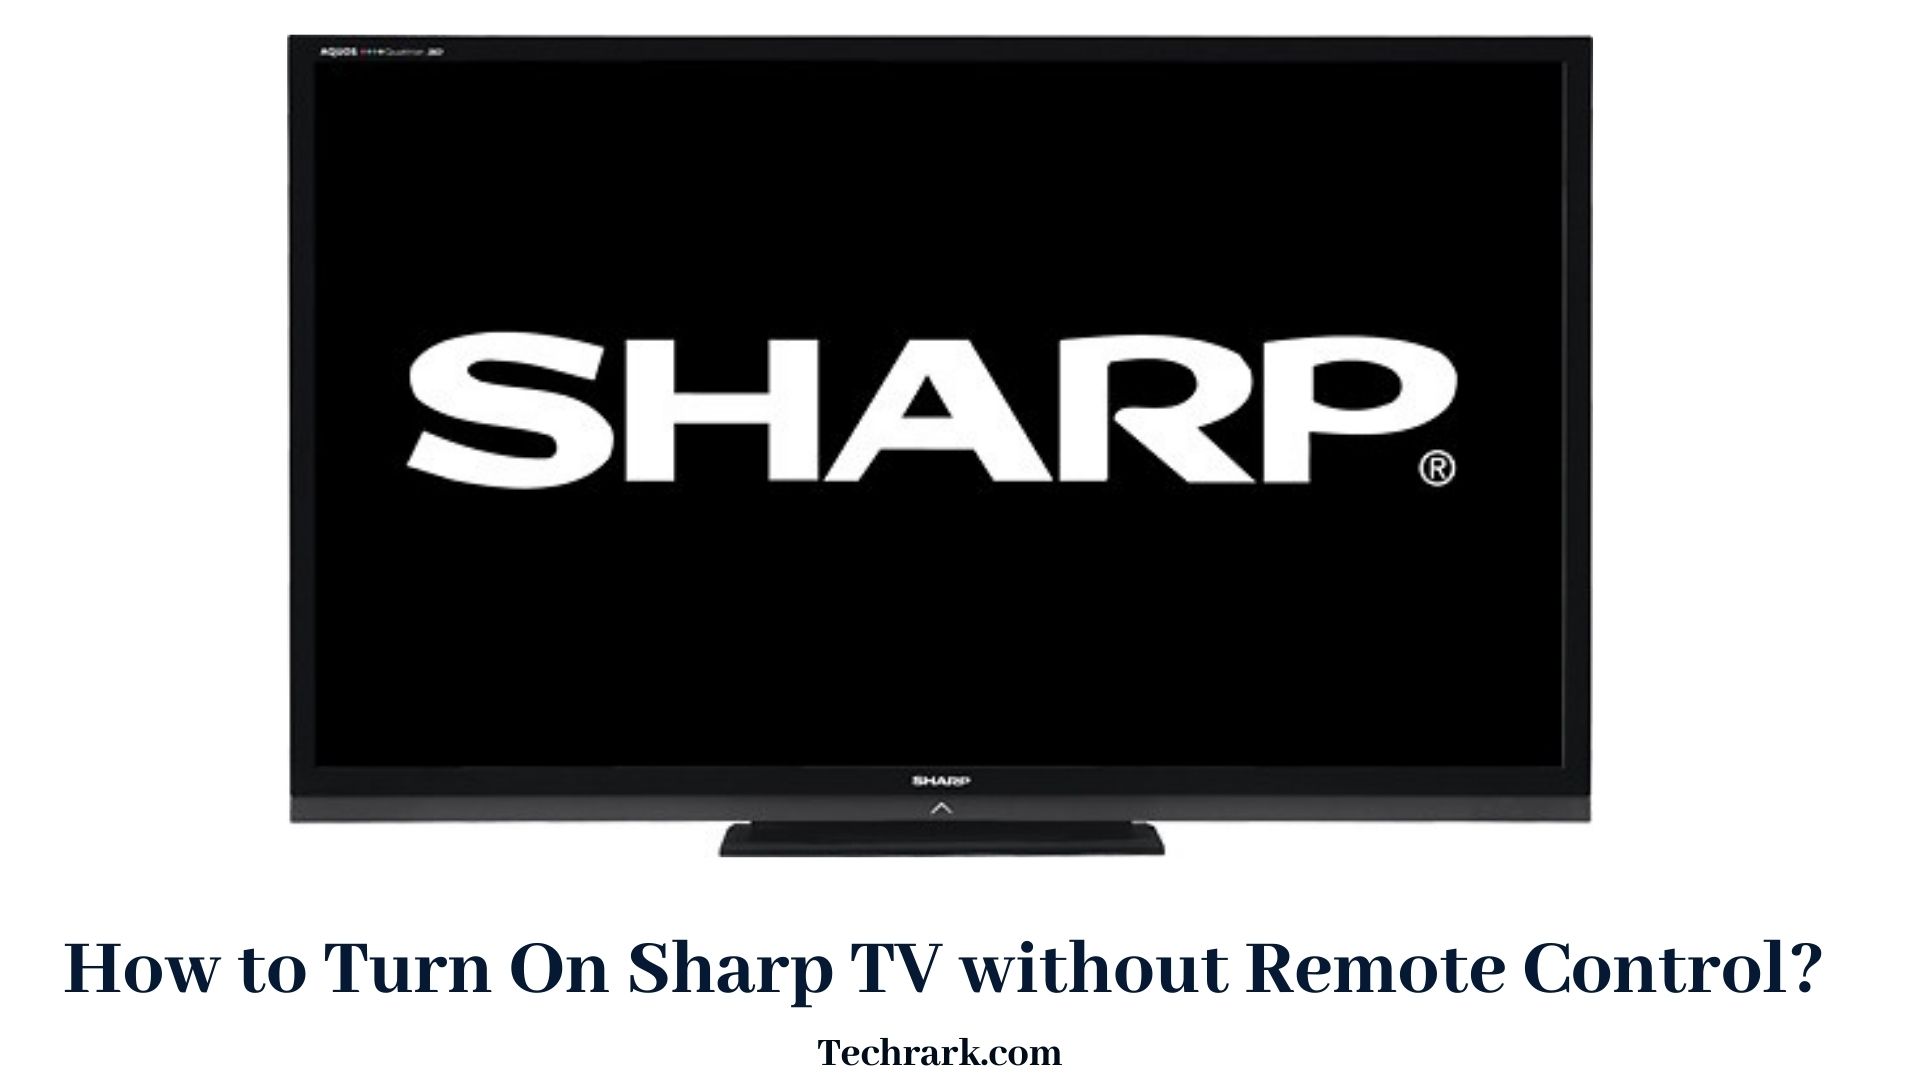 Turn On Sharp TV without Remote